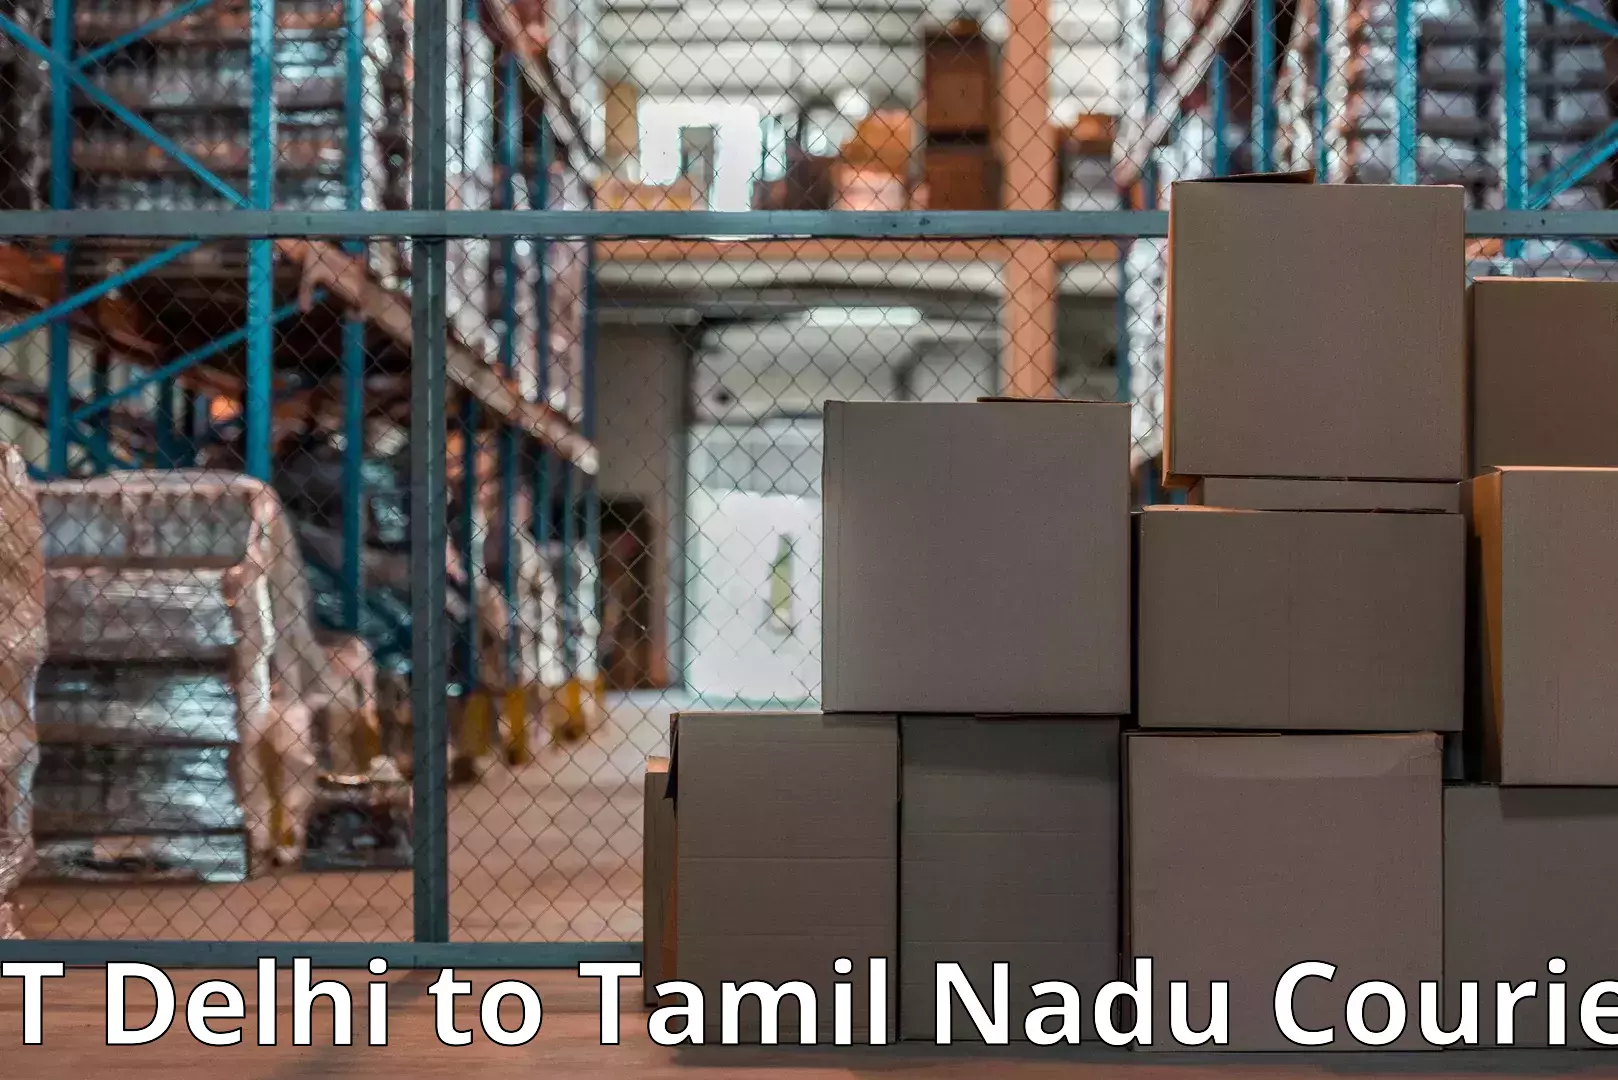 Quality relocation assistance IIT Delhi to Ariyalur